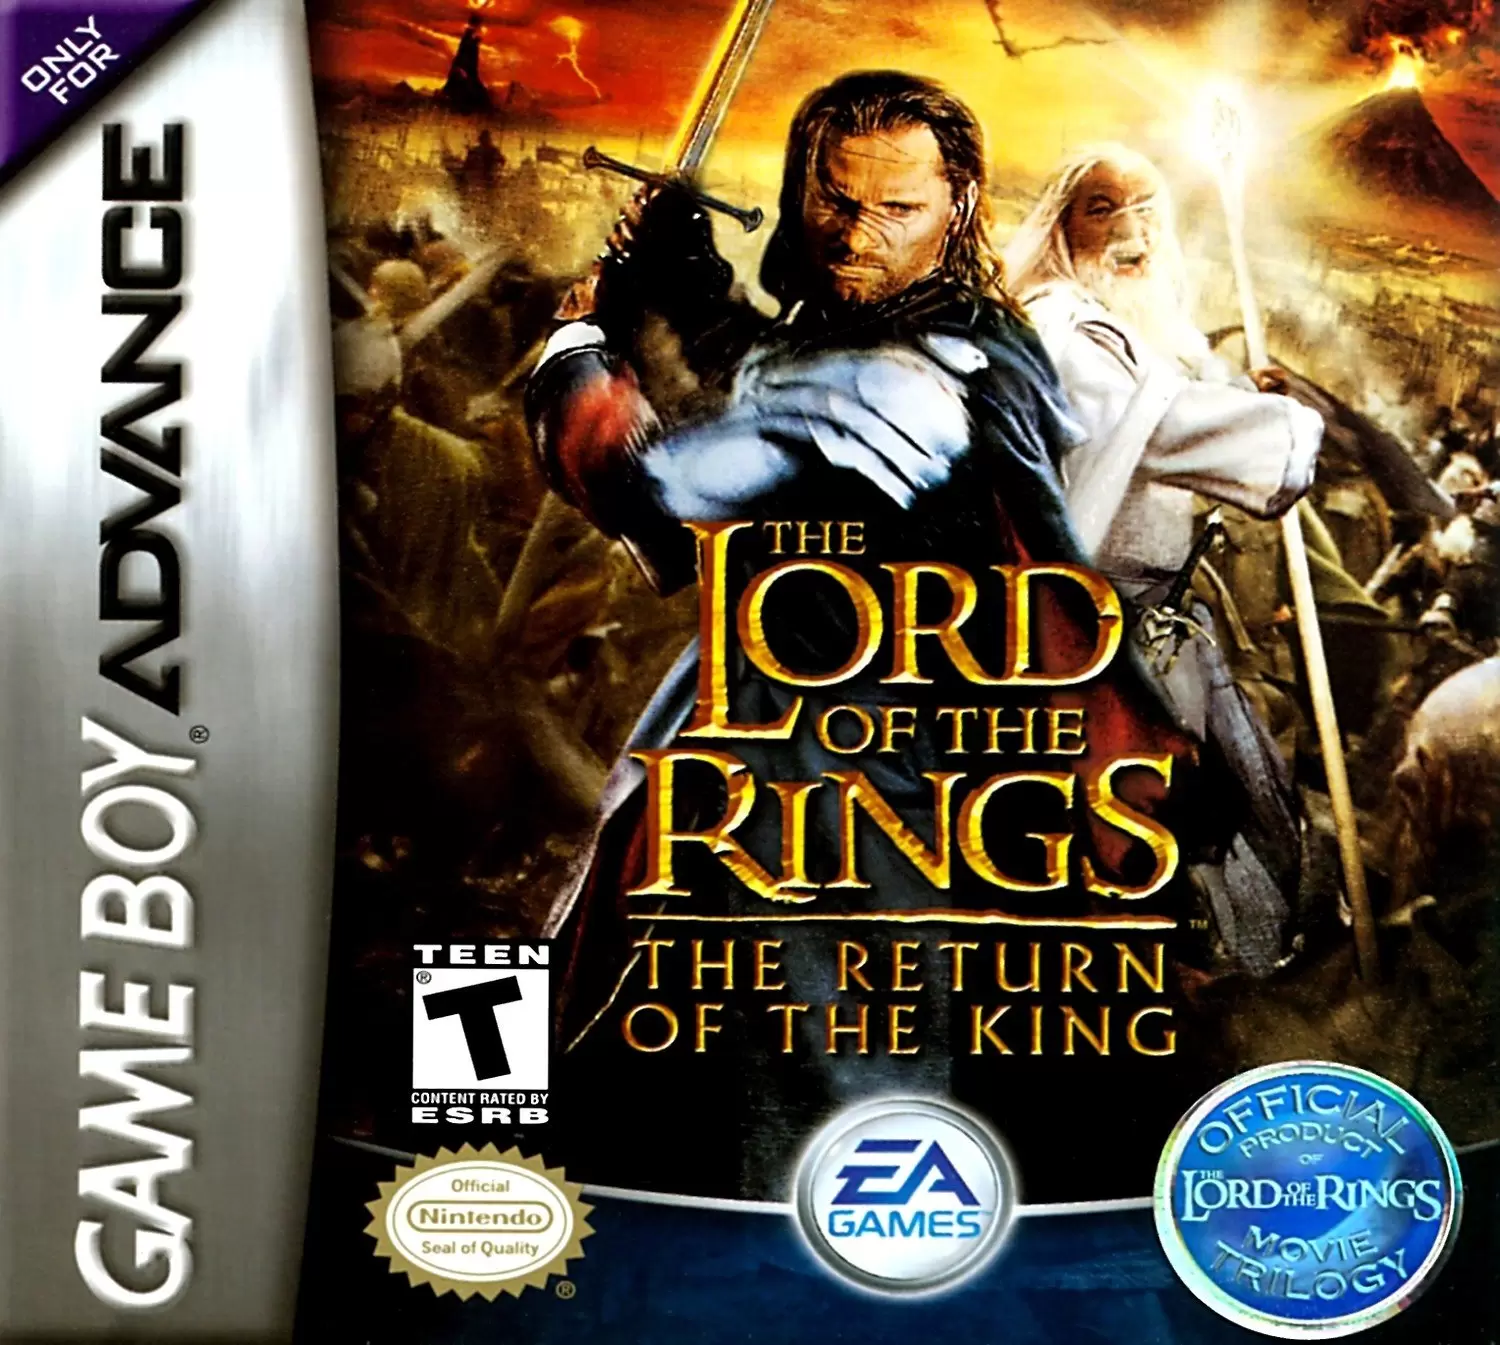 Game Boy Advance Games - The Lord of the Rings: The Return of the King